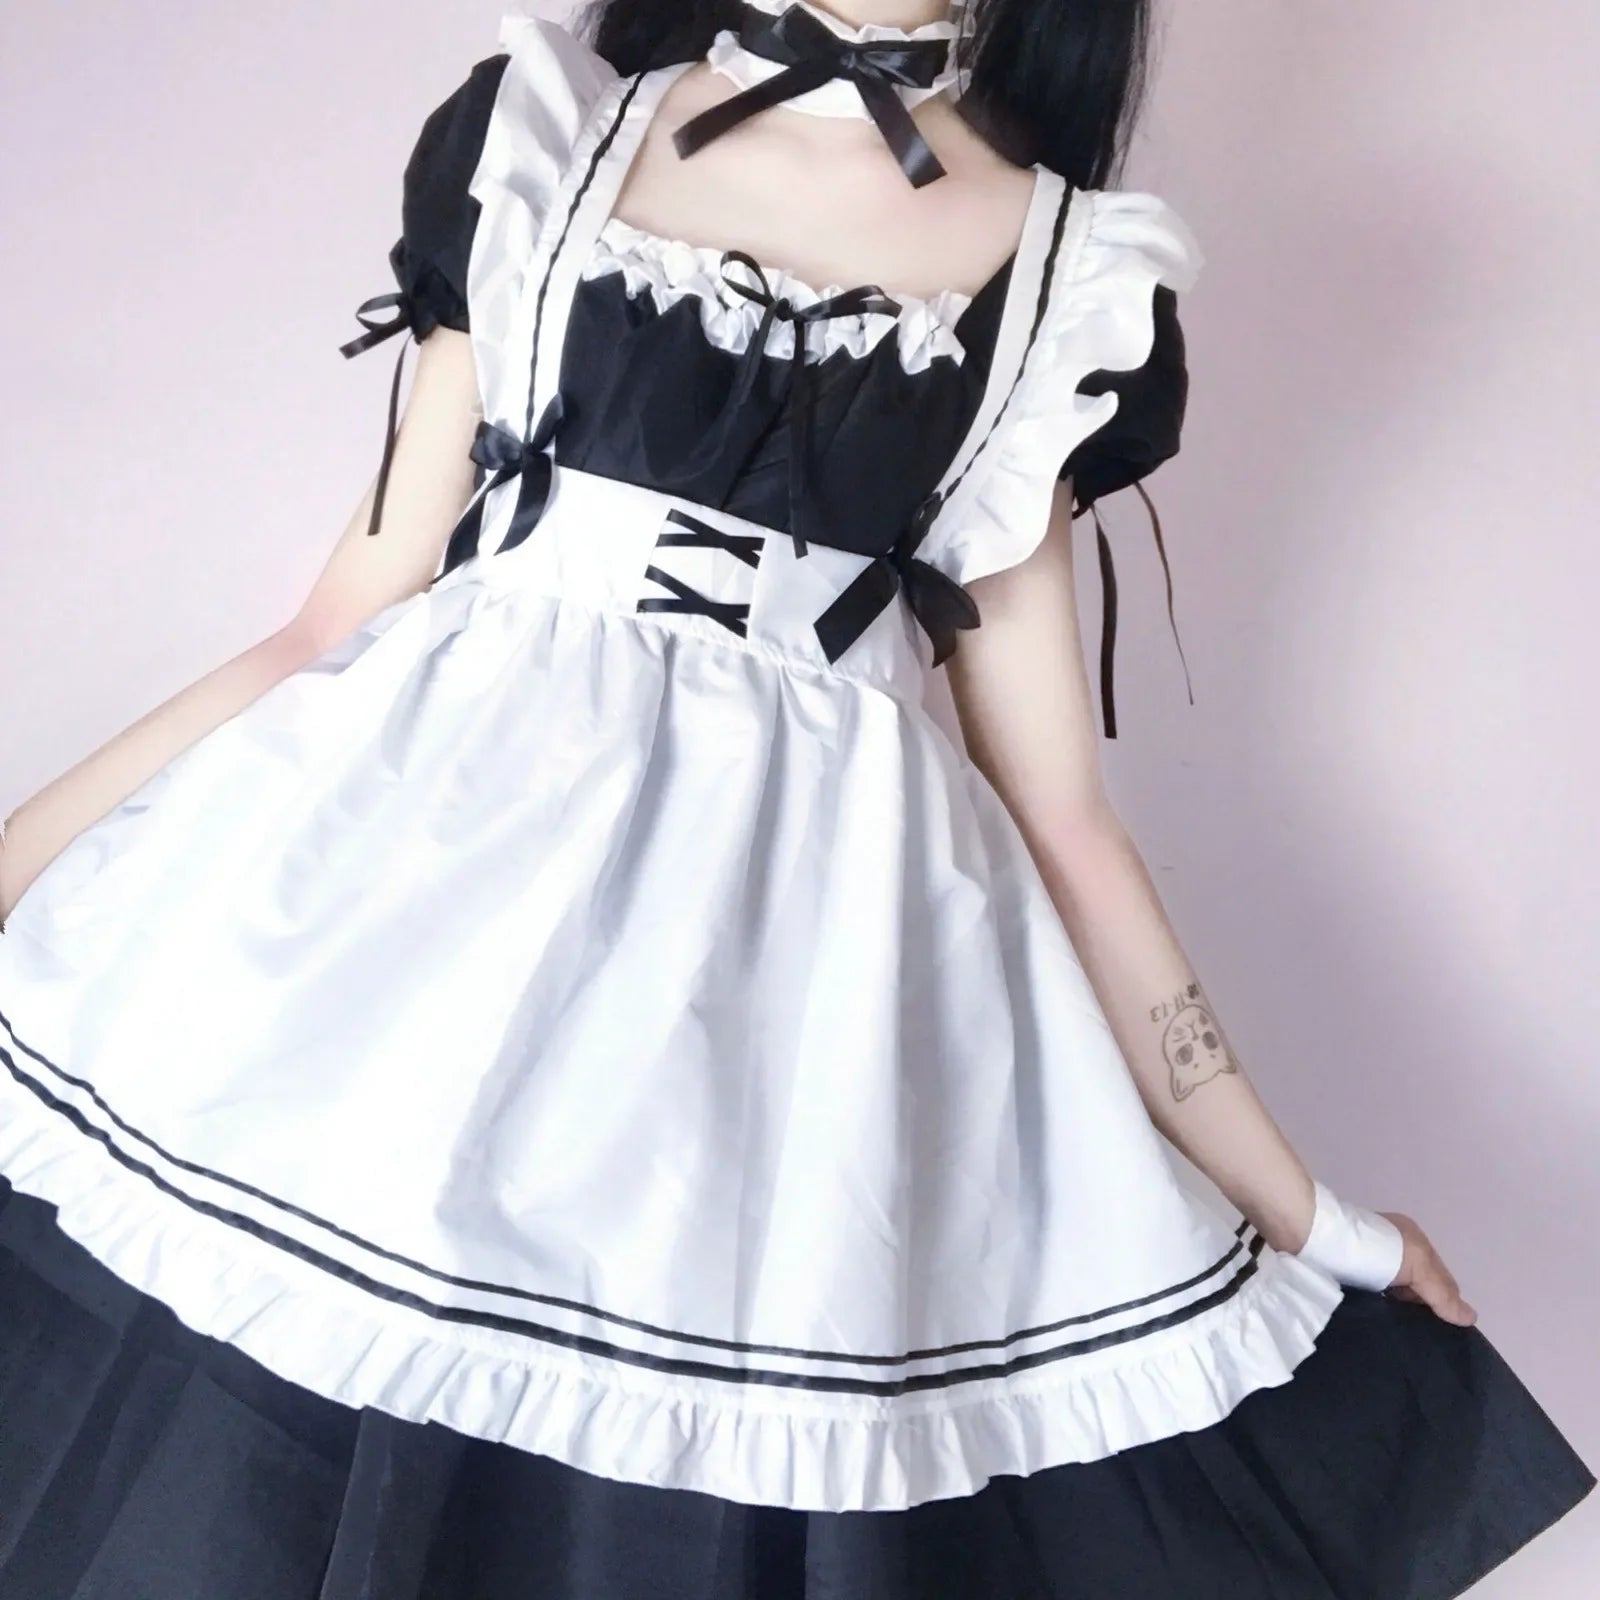 Black Cute Lolita Maid Costume: Lovely Cosplay Outfit - All Dresses - Costumes - 4 - 2024